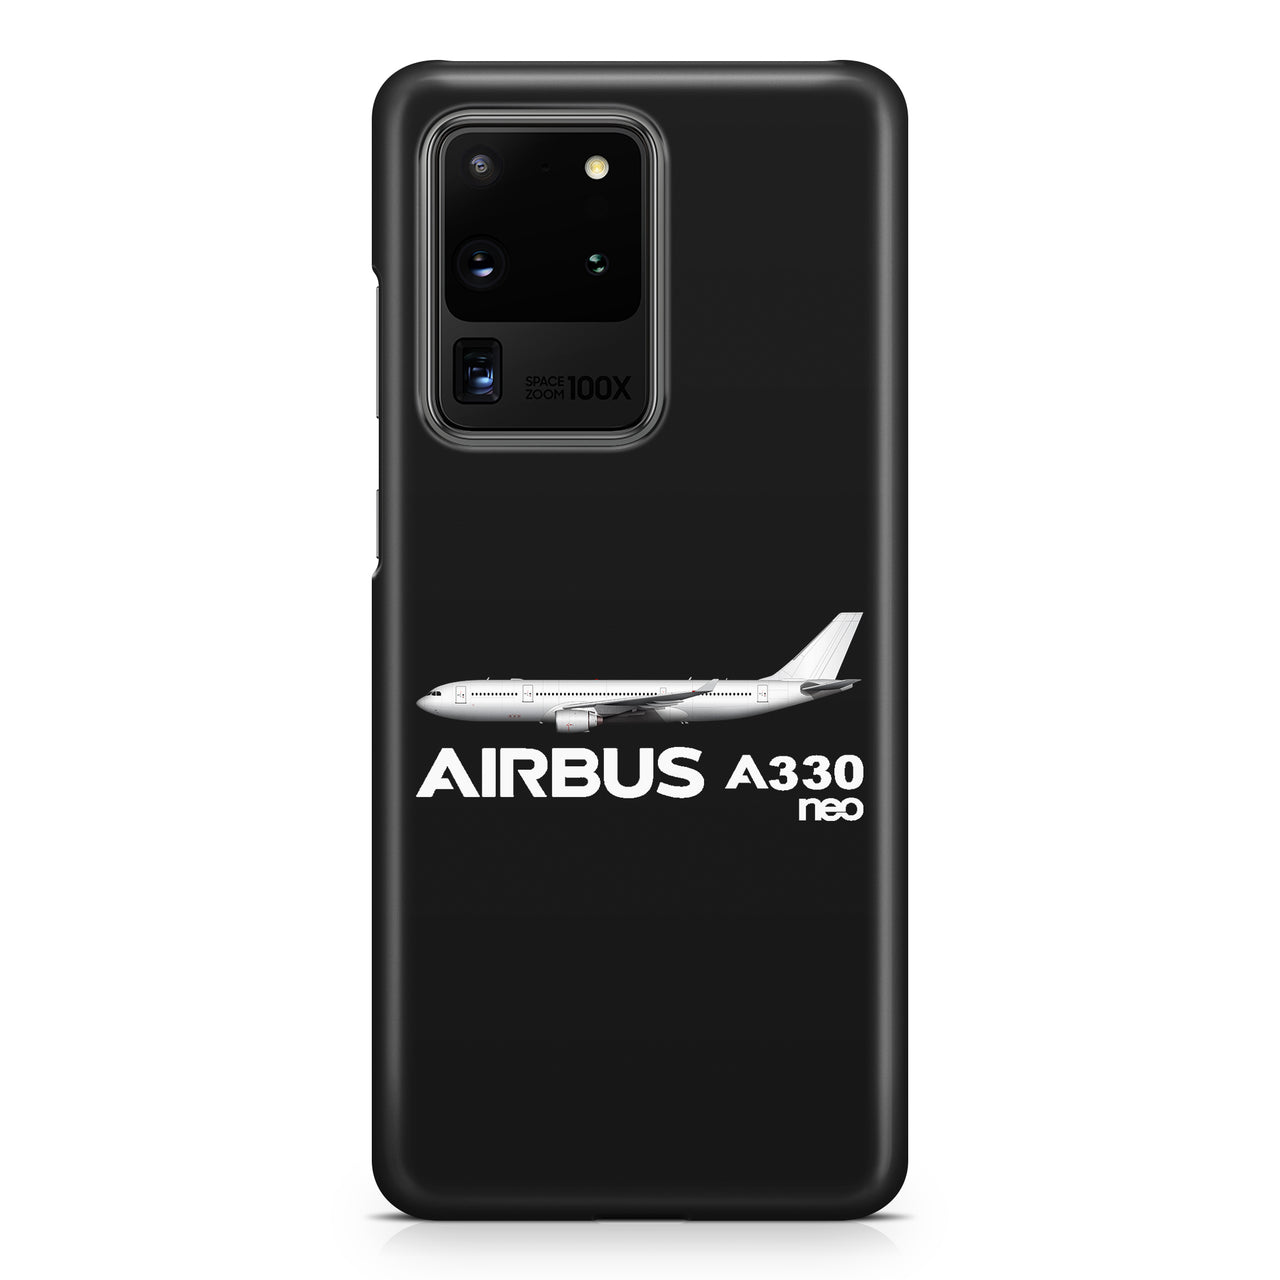 The Airbus A330neo Samsung A Cases